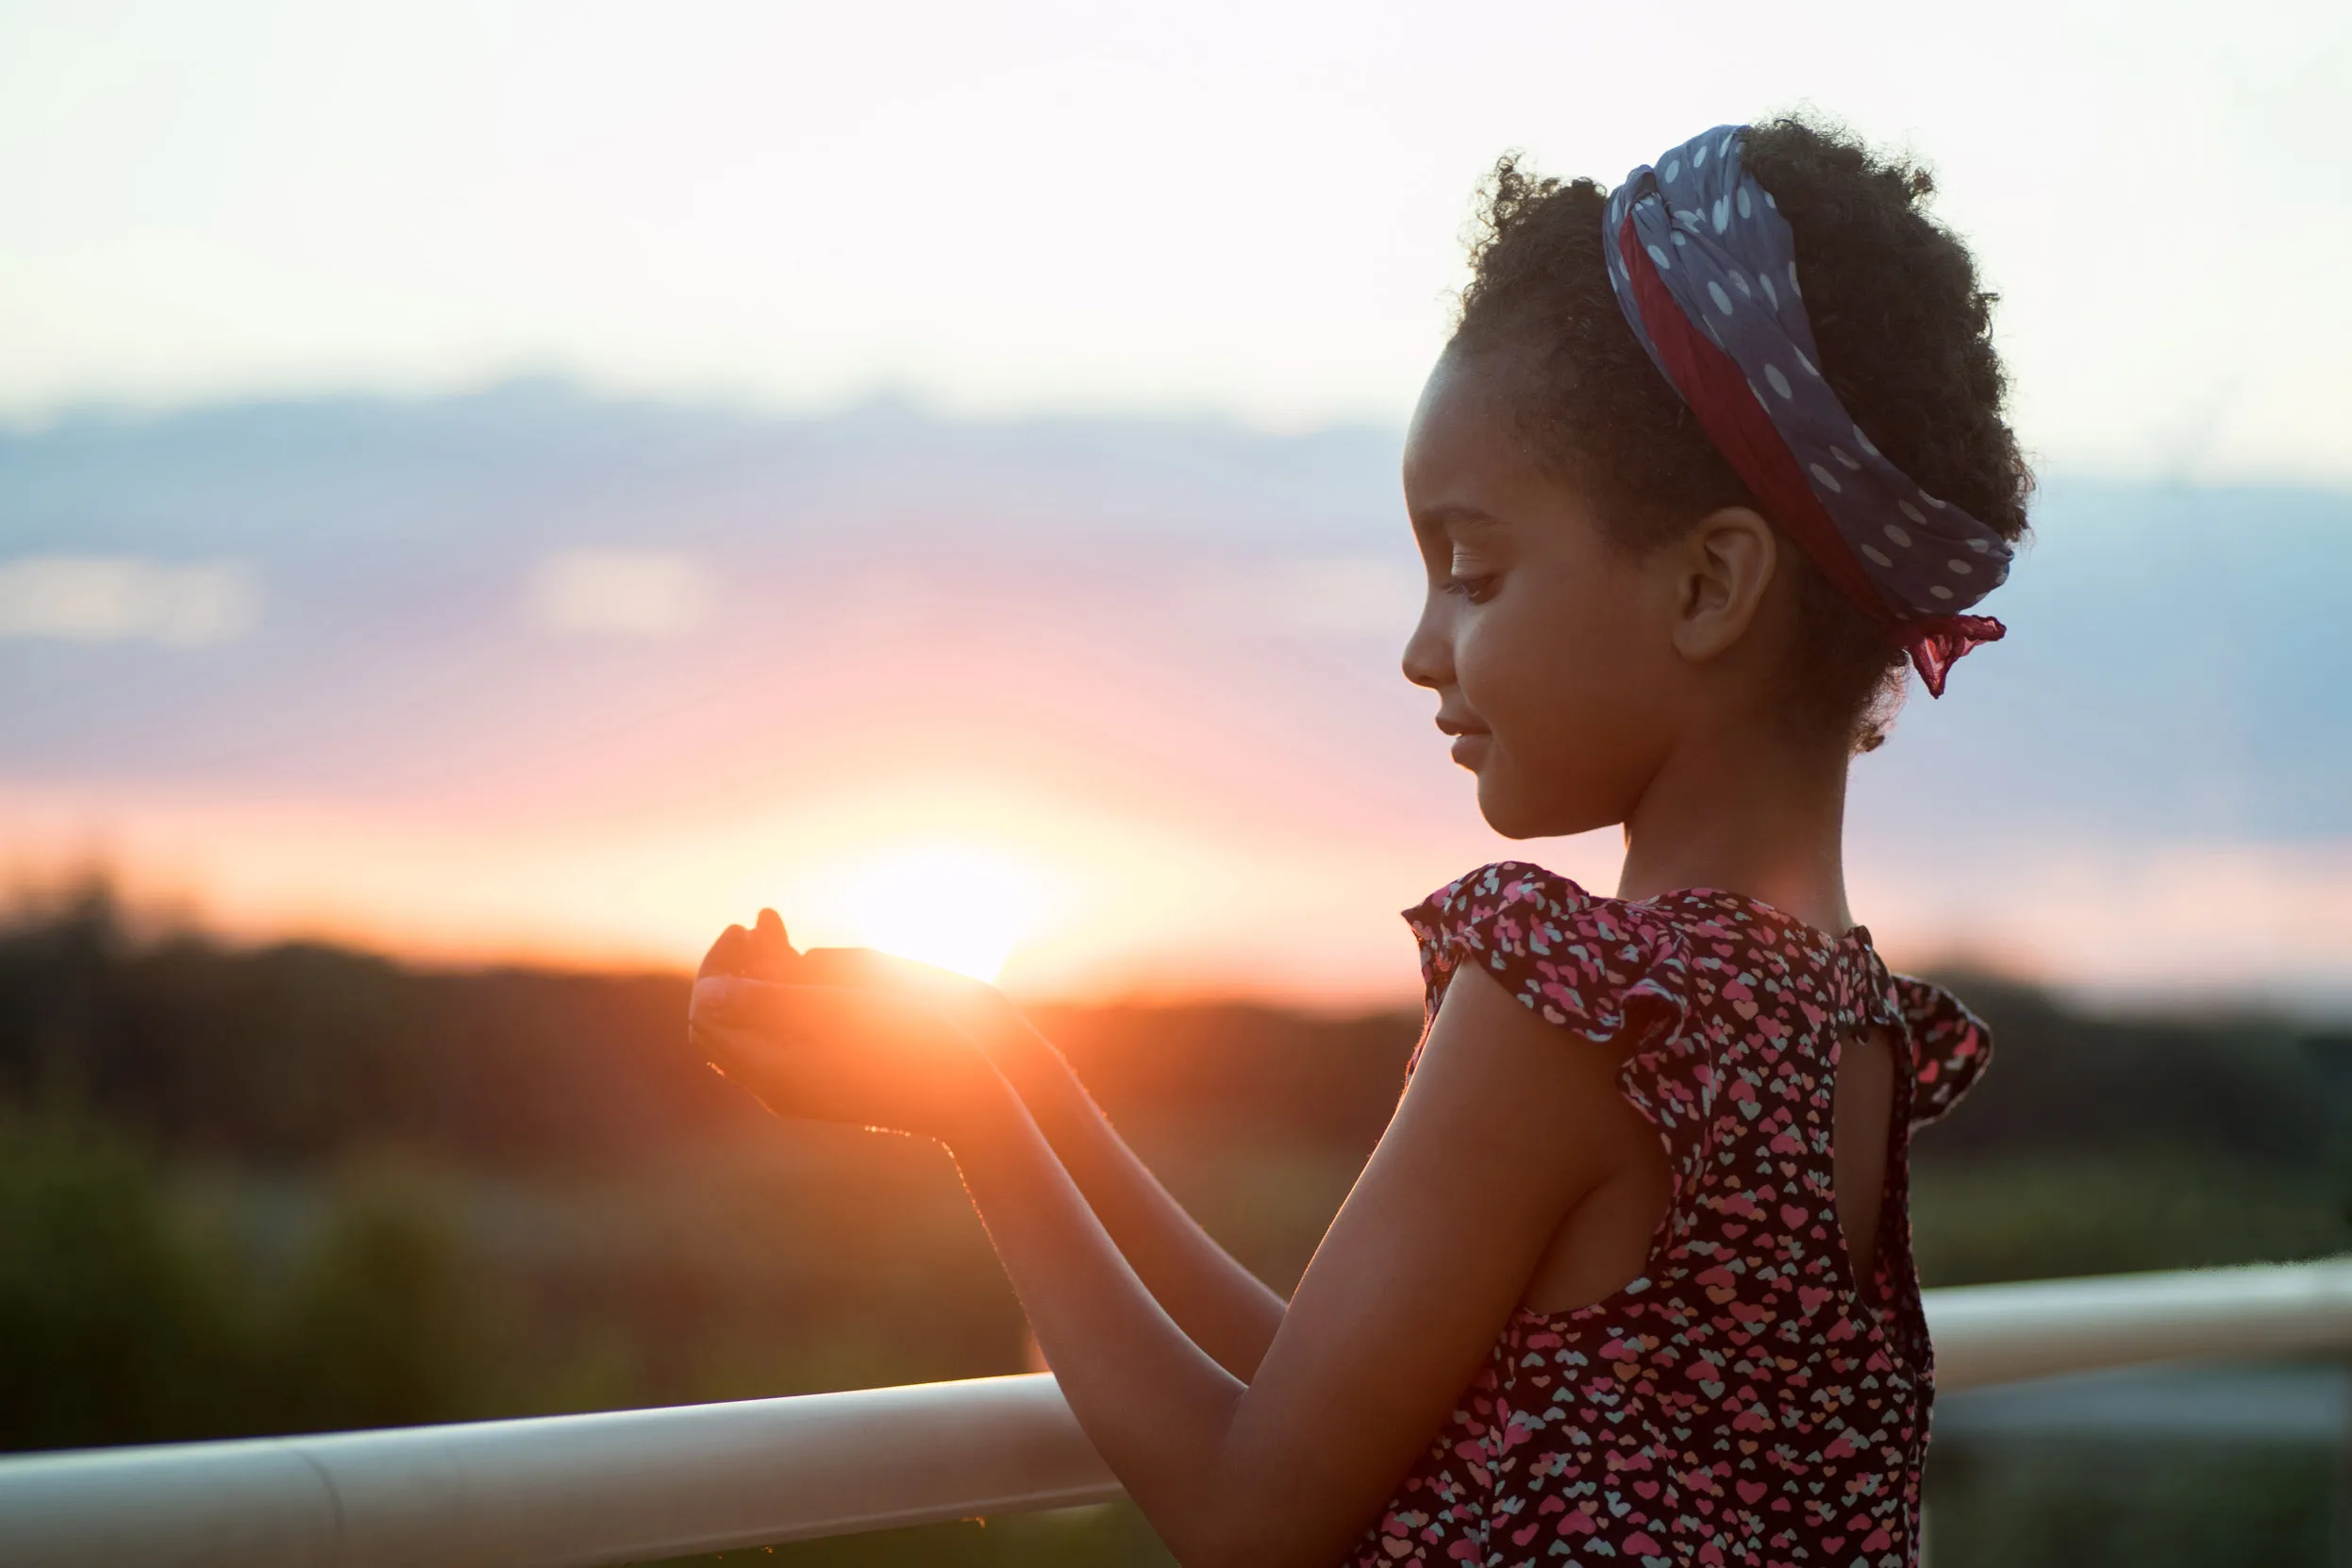 The side view of a child cupping the sunset in their hands stood on a bridge. 